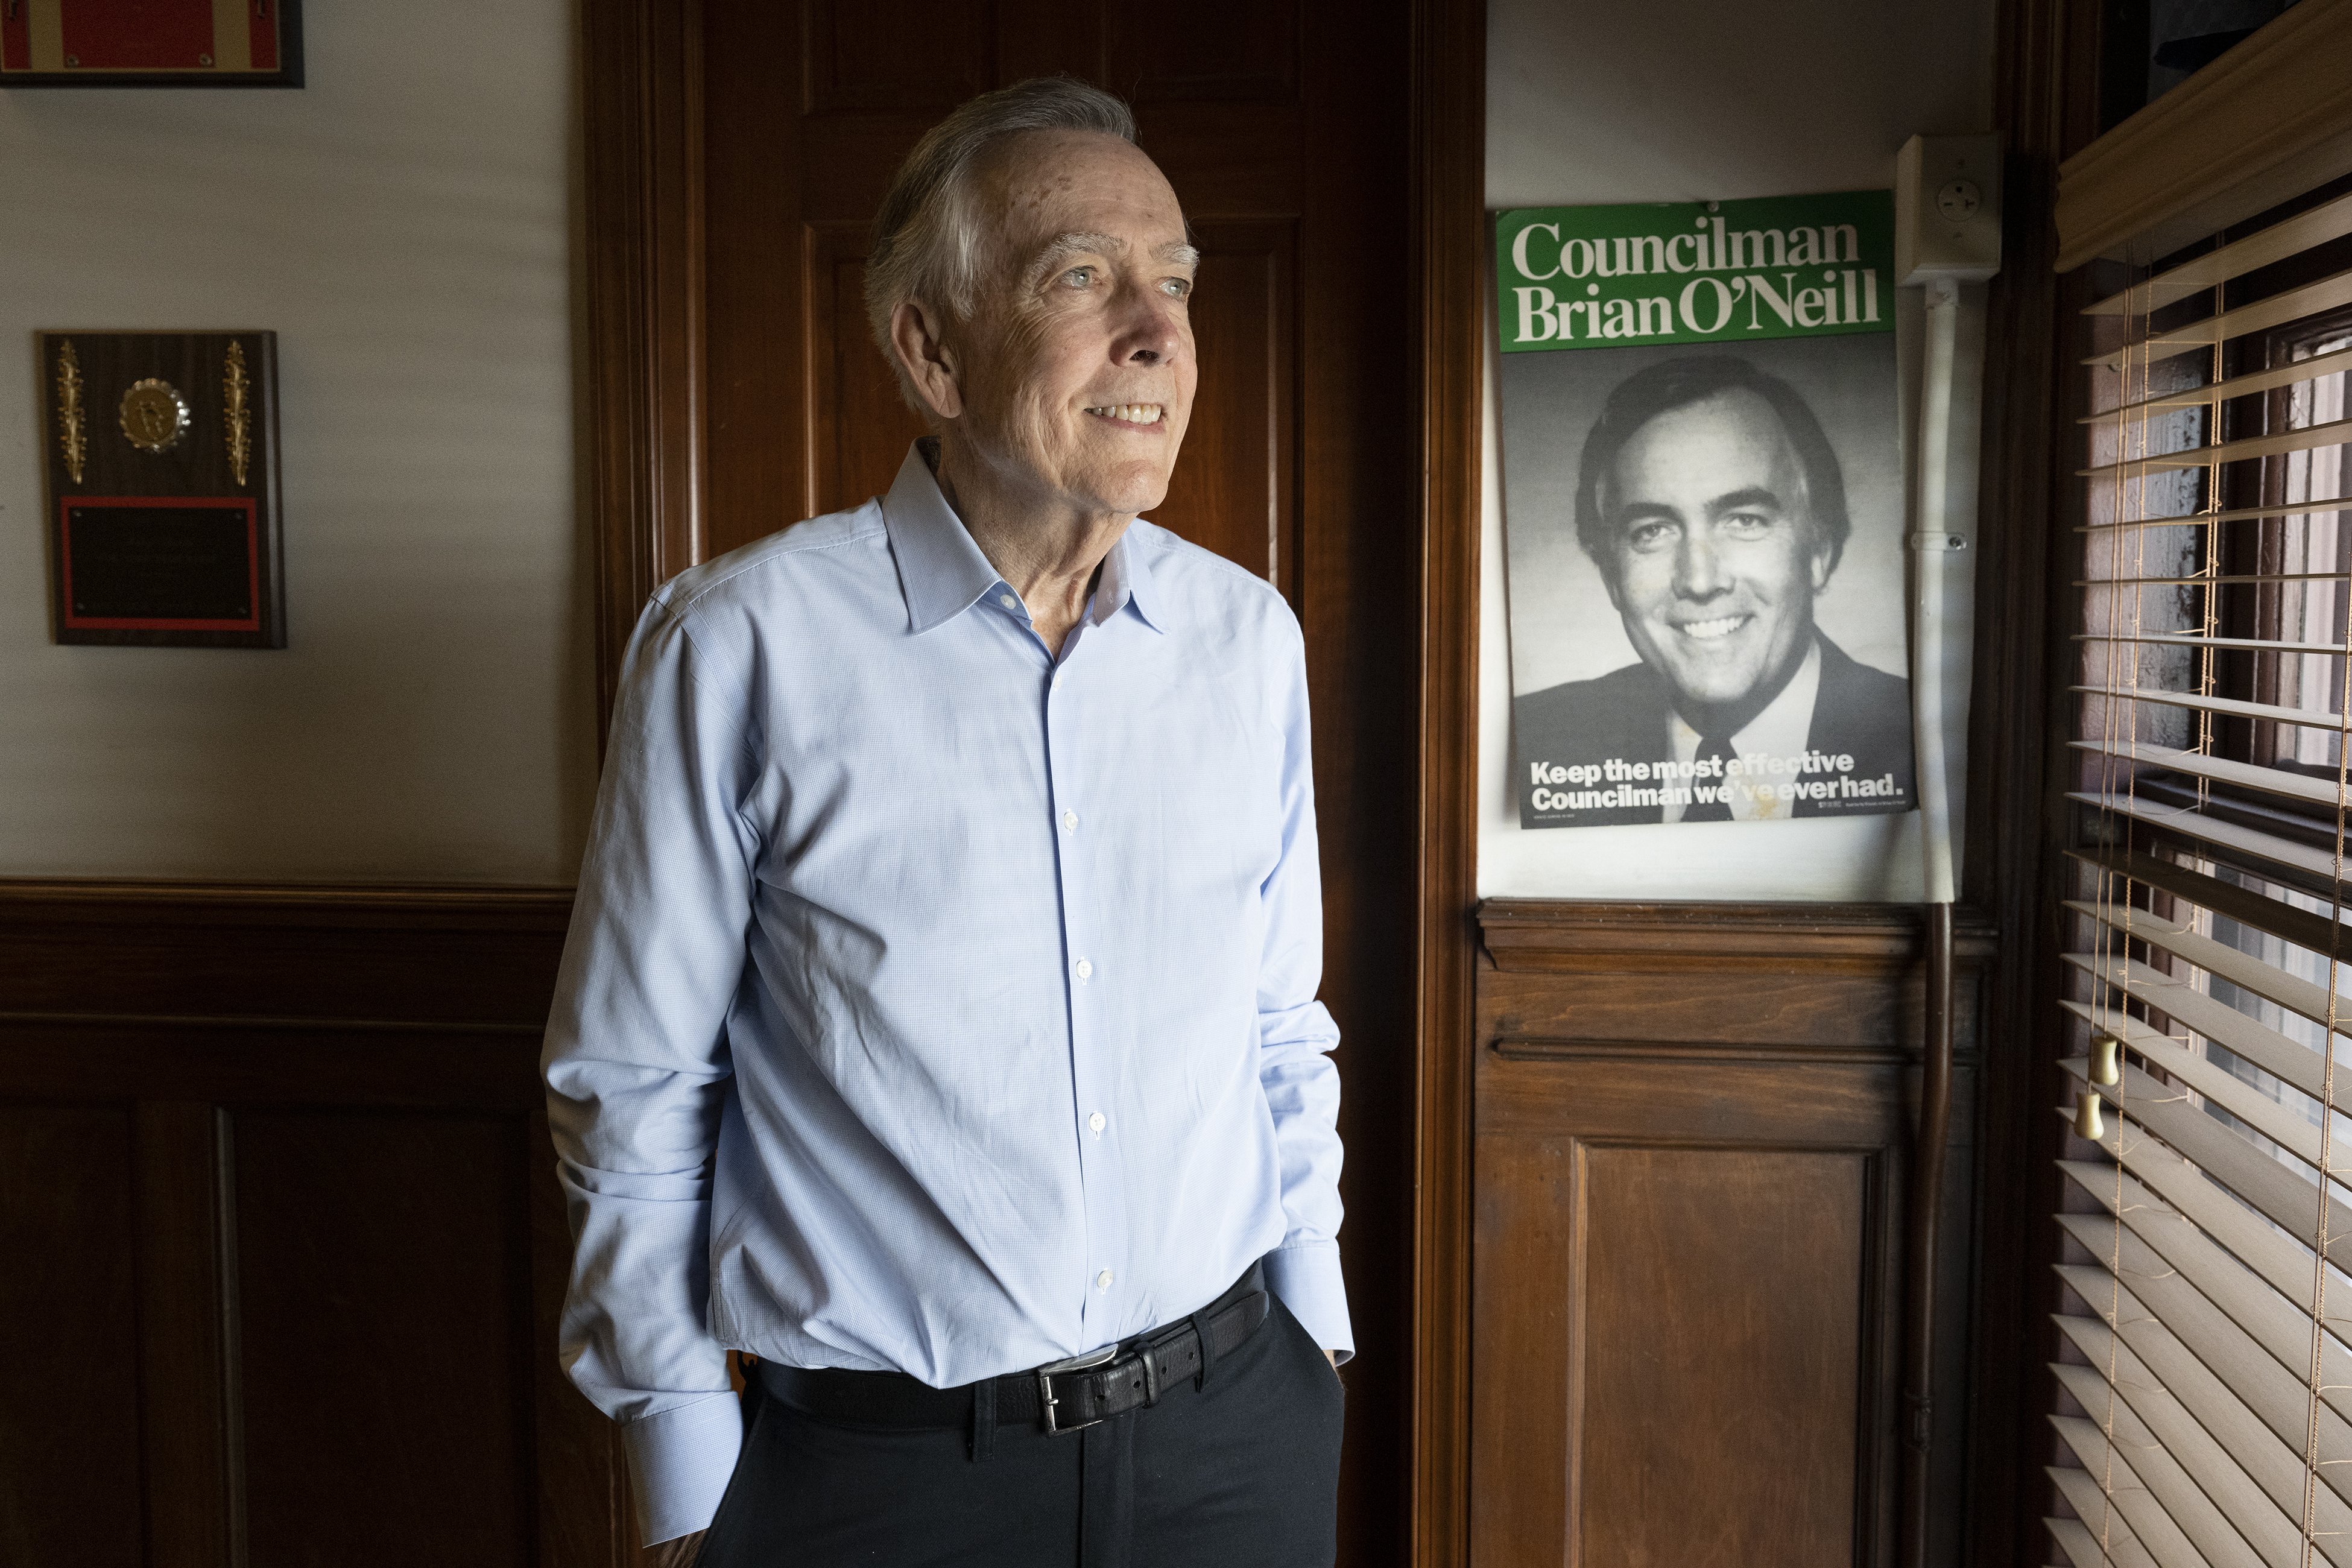 Who is Brian O'Neill? The longtime City Council member in